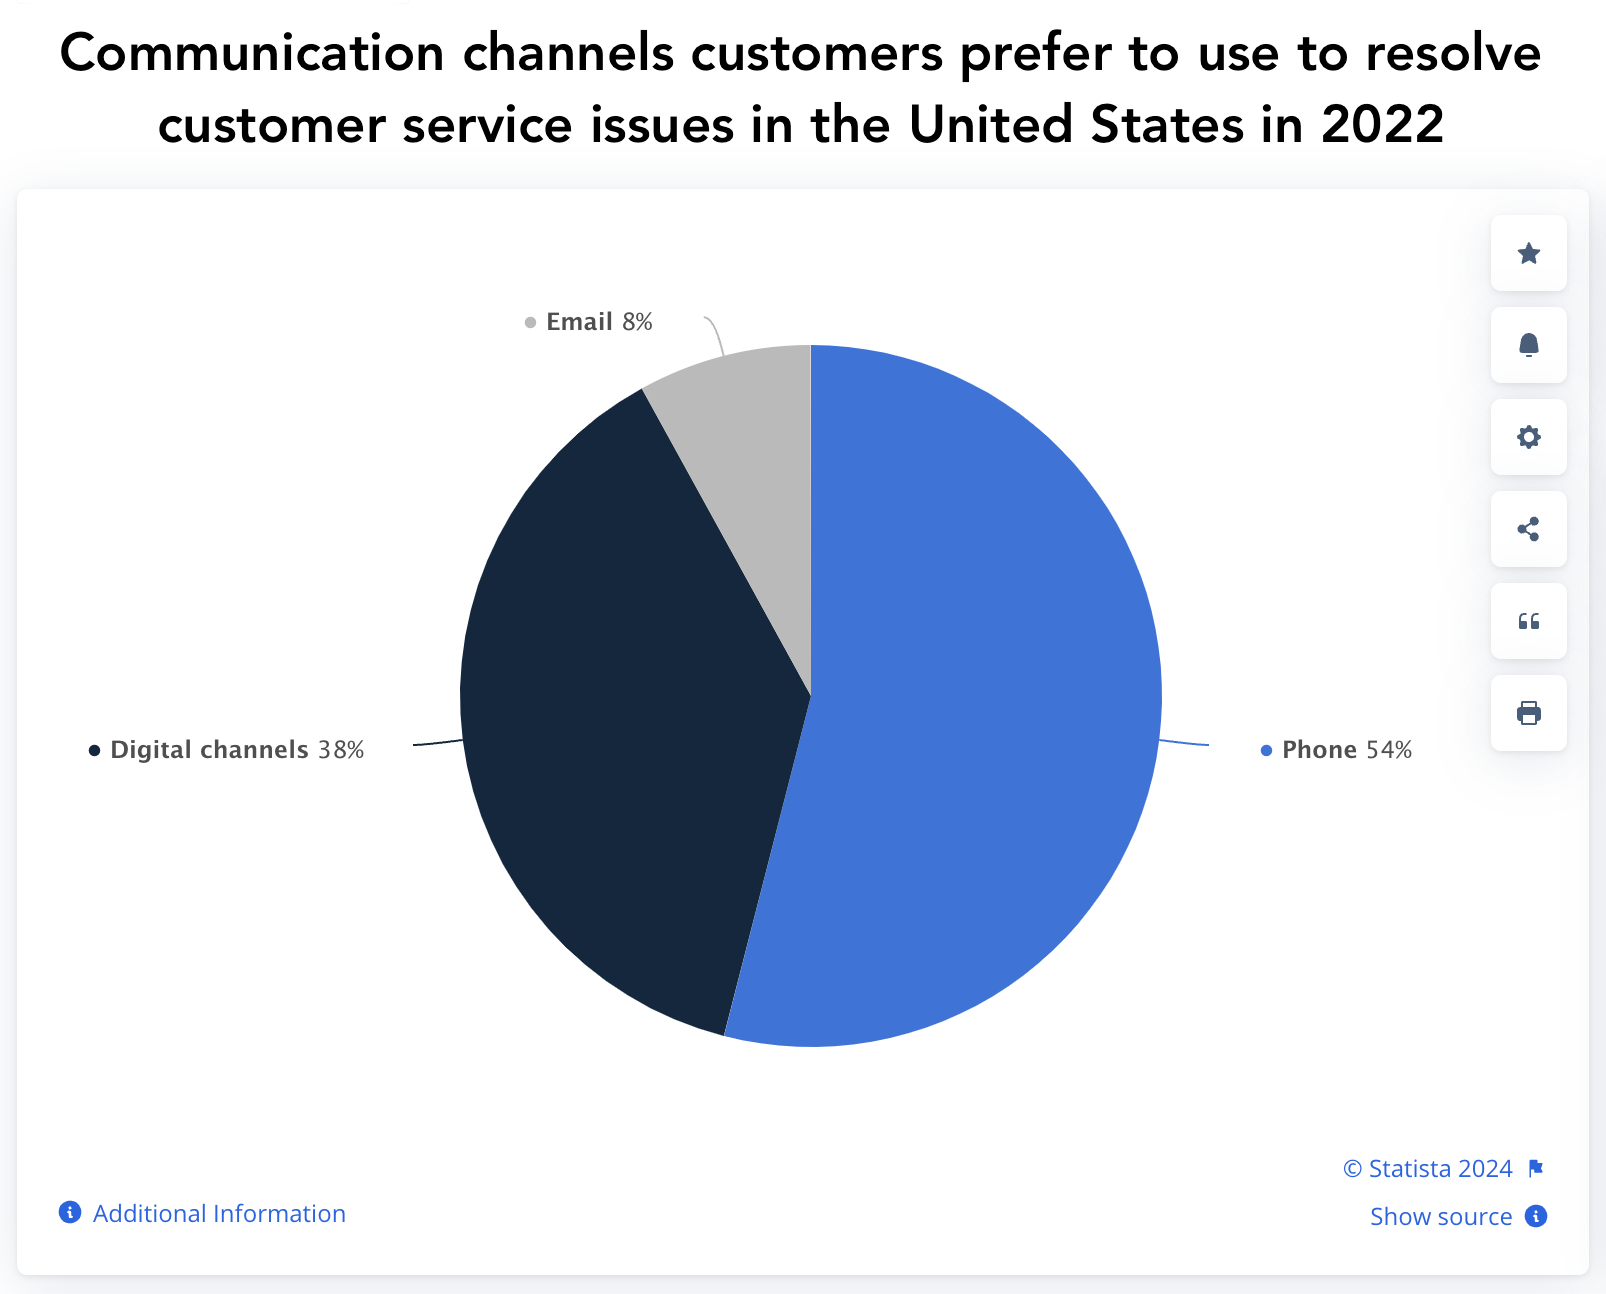 Statista pie chart showing the communication channels customers prefer to use to resolve issues in the United States in 2022 - phone, digital channels, email
